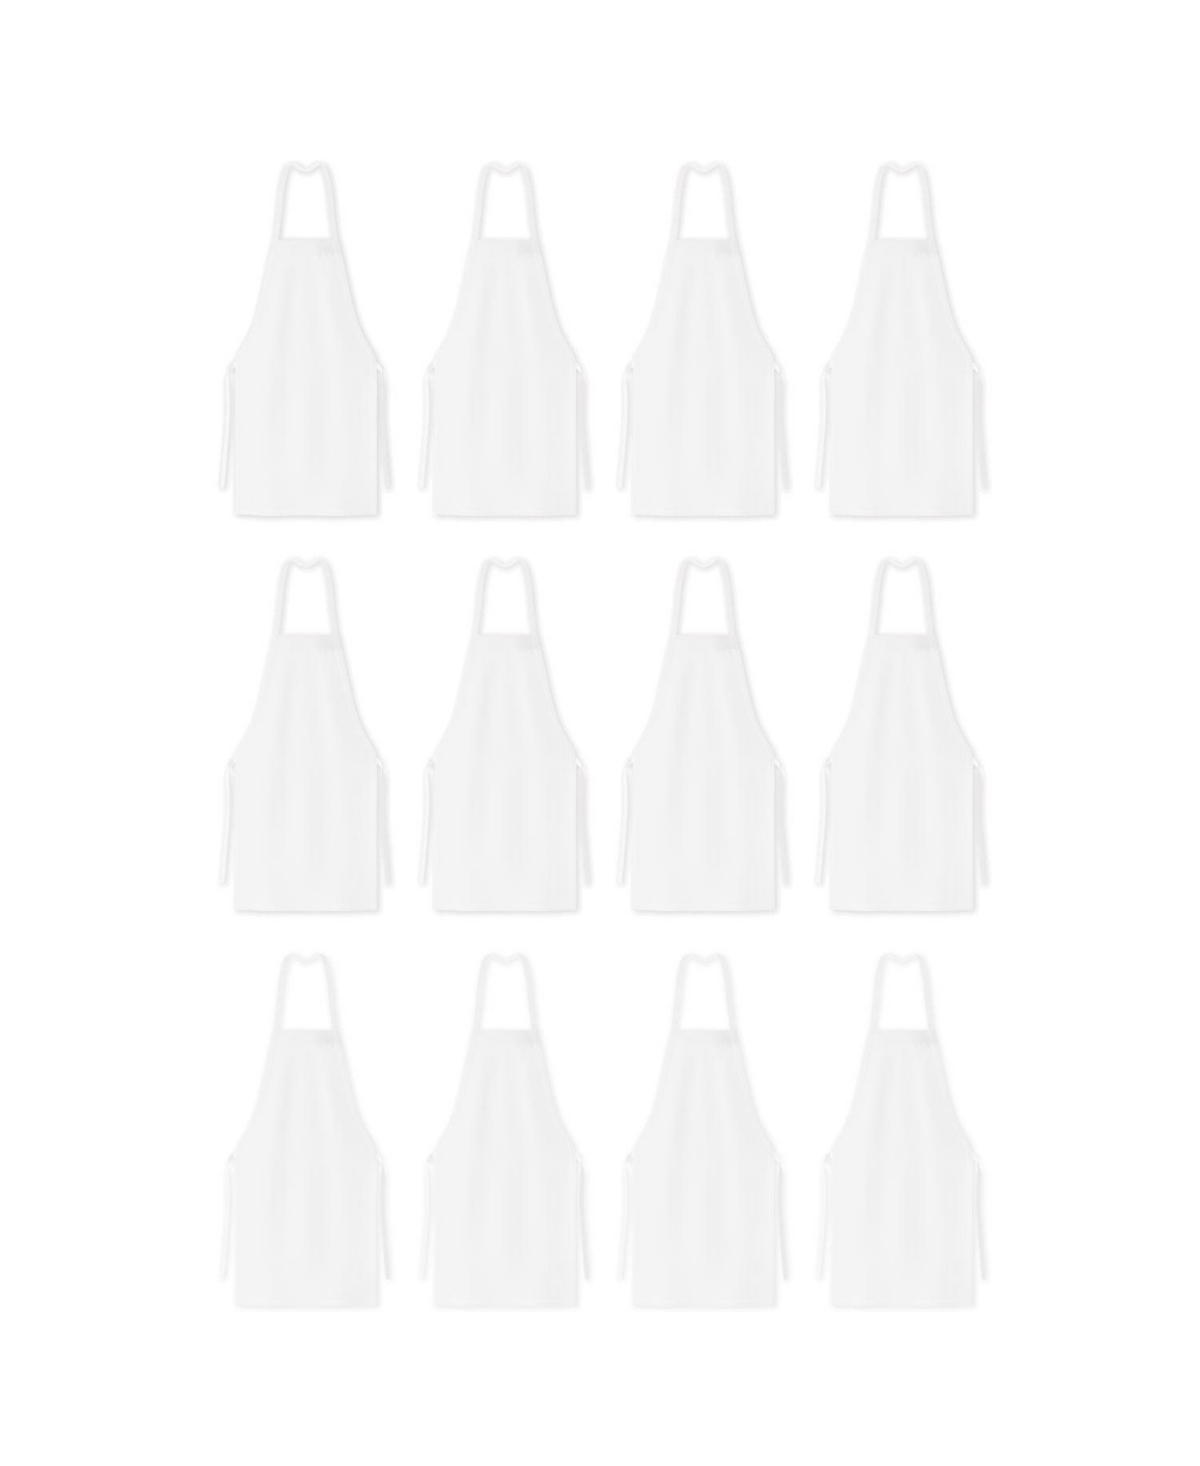 Arkwright Mariposa Bib Aprons (12 Pack), 33x30, Spun Polyester, Color Options, Adjustable Ties - White